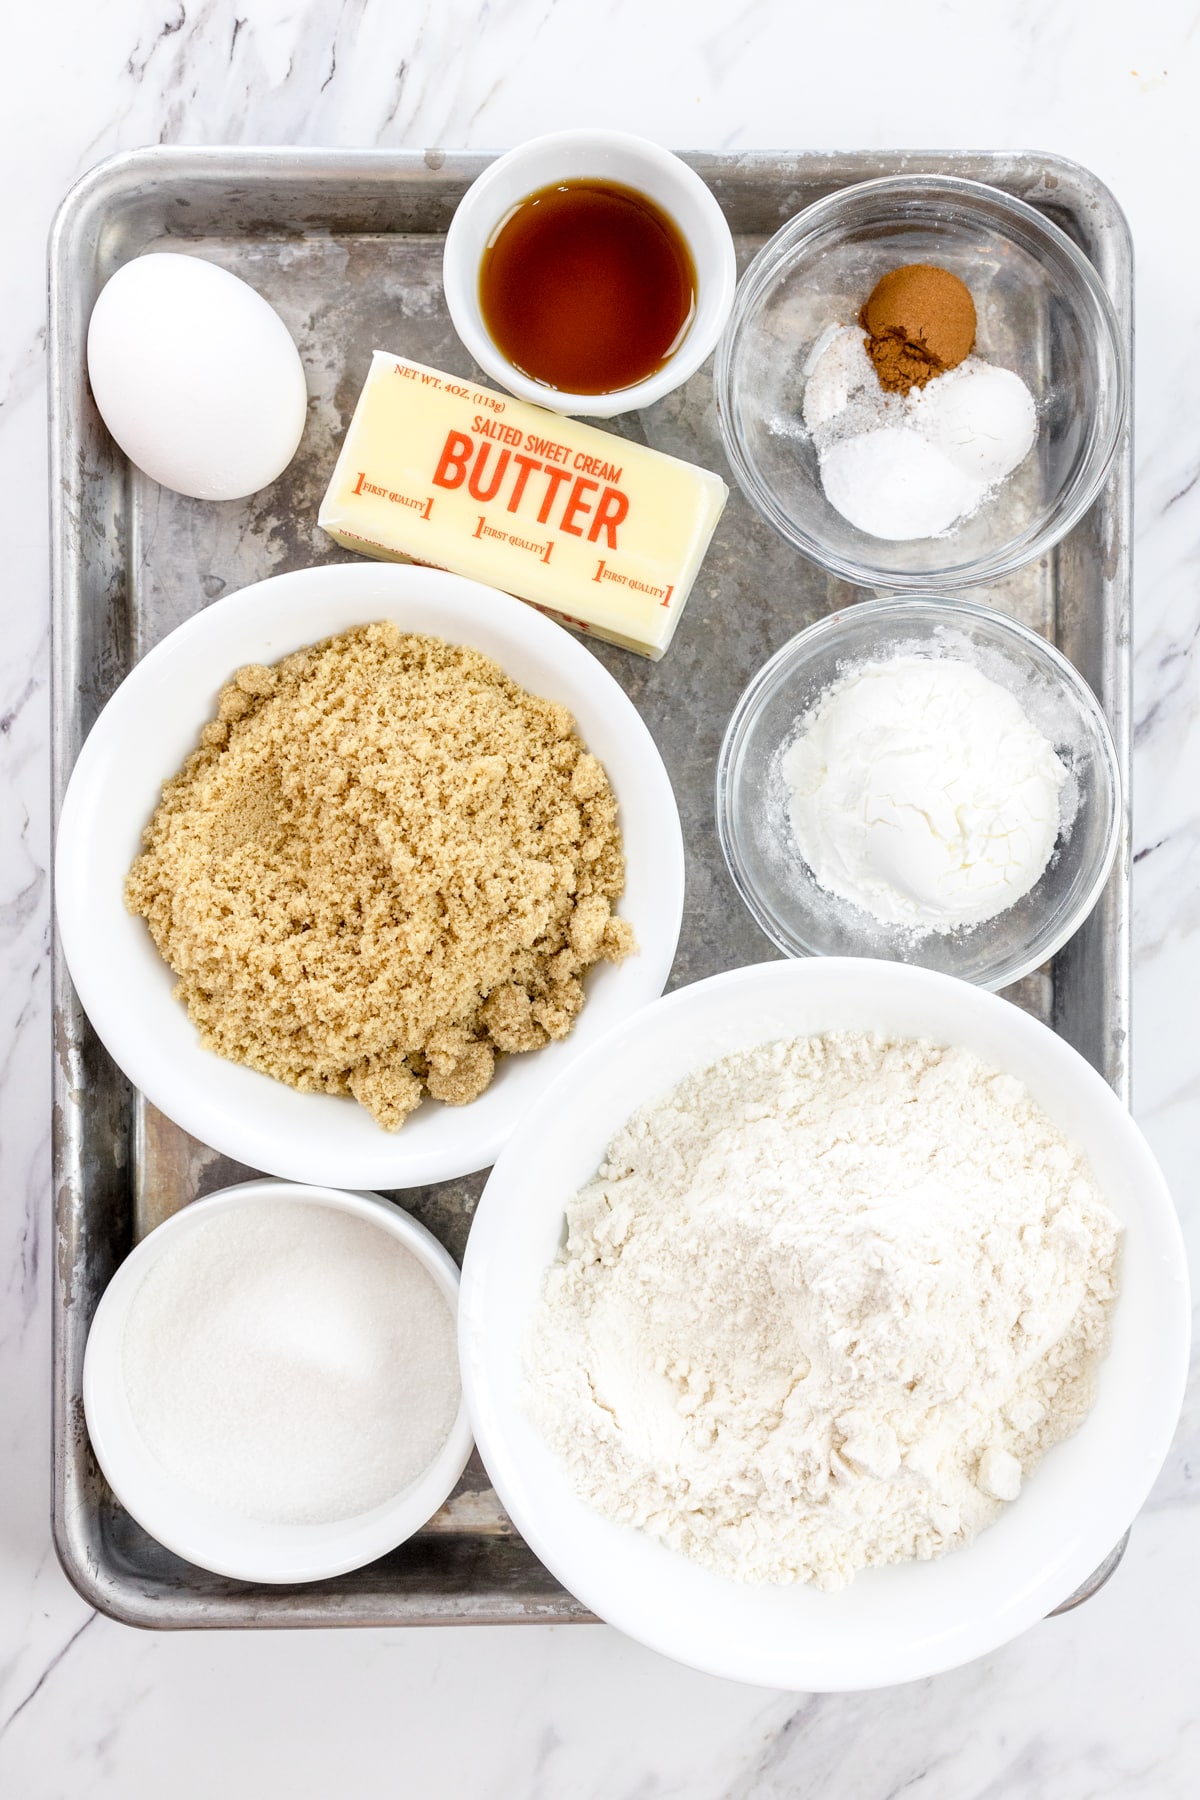 Top view of ingredients needed to make Churro Cookies in small bowls on a baking tray.